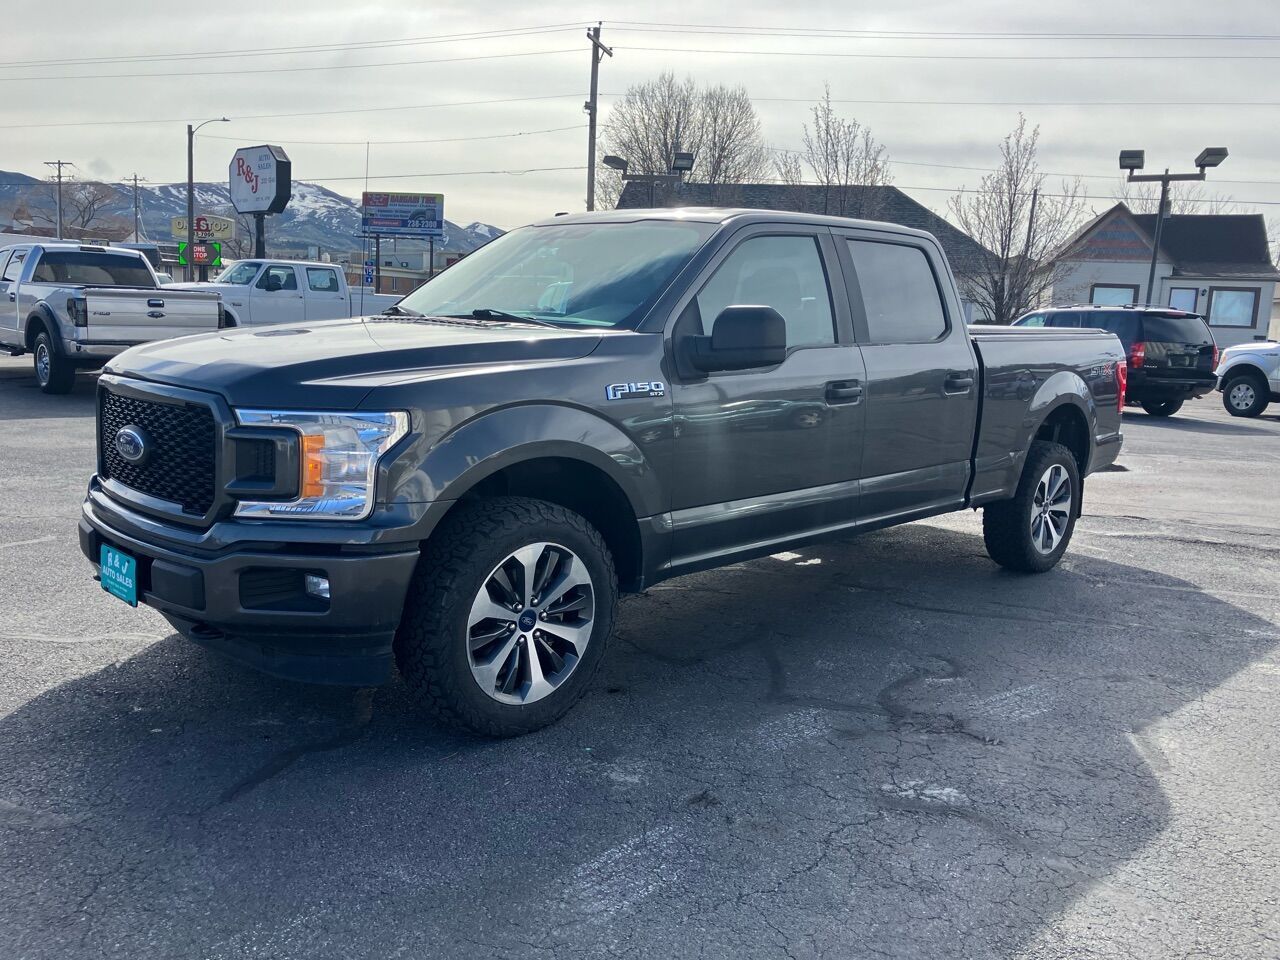 2019 - Ford - F-150 - $23,995